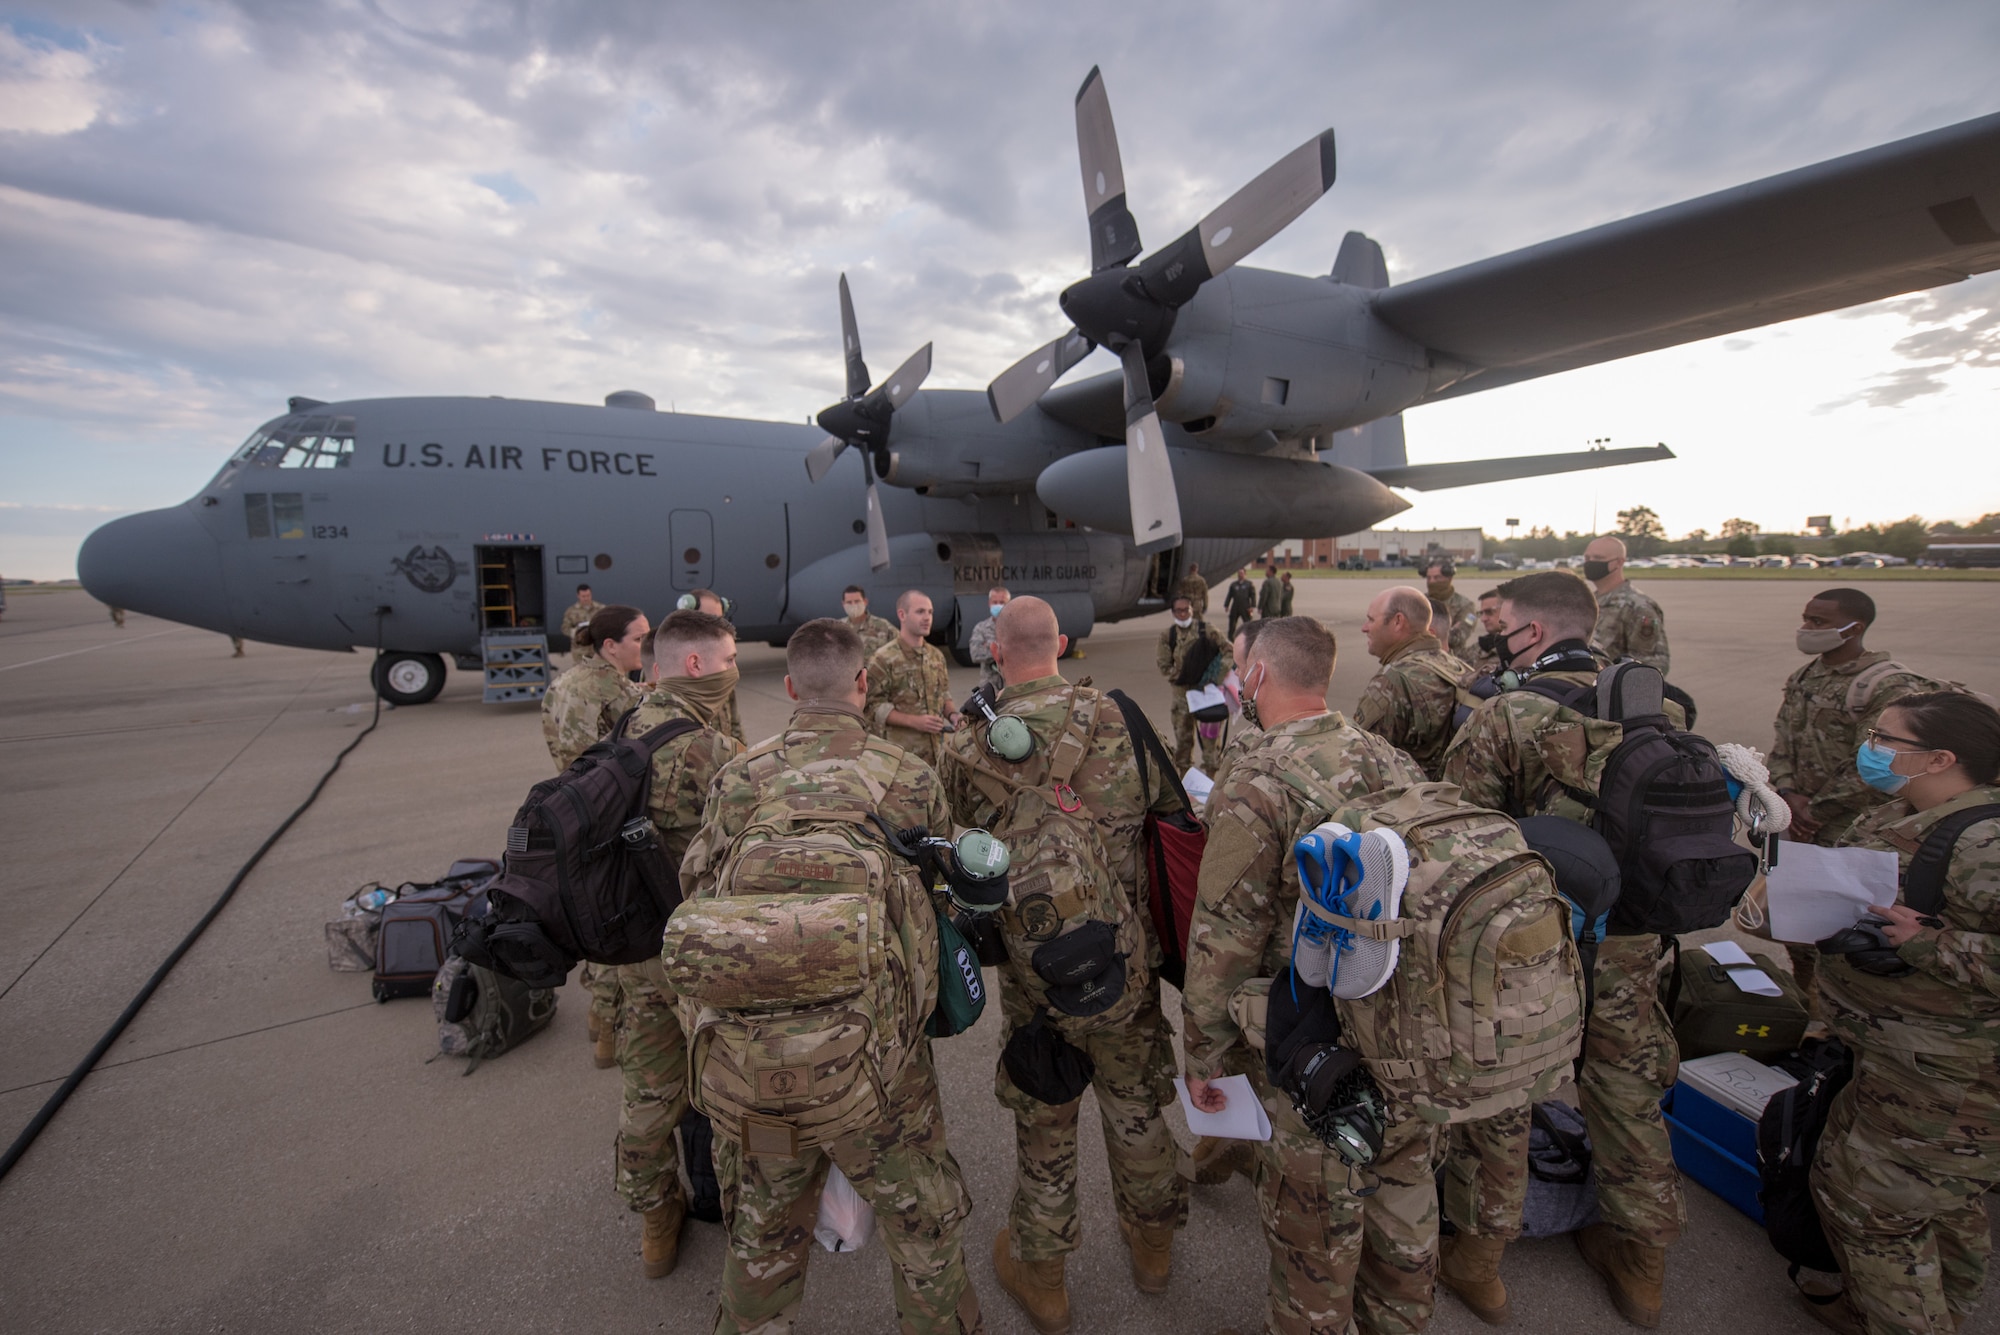 Members of the 123rd Airlift Wing board a C-130 Hercules aircraft at the Kentucky Air National Guard Base in Louisville, Ky., June 24, 2020, prior to deploying to the Persian Gulf region. The Airmen will spend four months flying troops and cargo across the U.S. Central Command area of responsibility, which includes Iraq, Afghanistan and northern Africa. (U.S. Air National Guard photo by Senior Airman Clayton Wear)